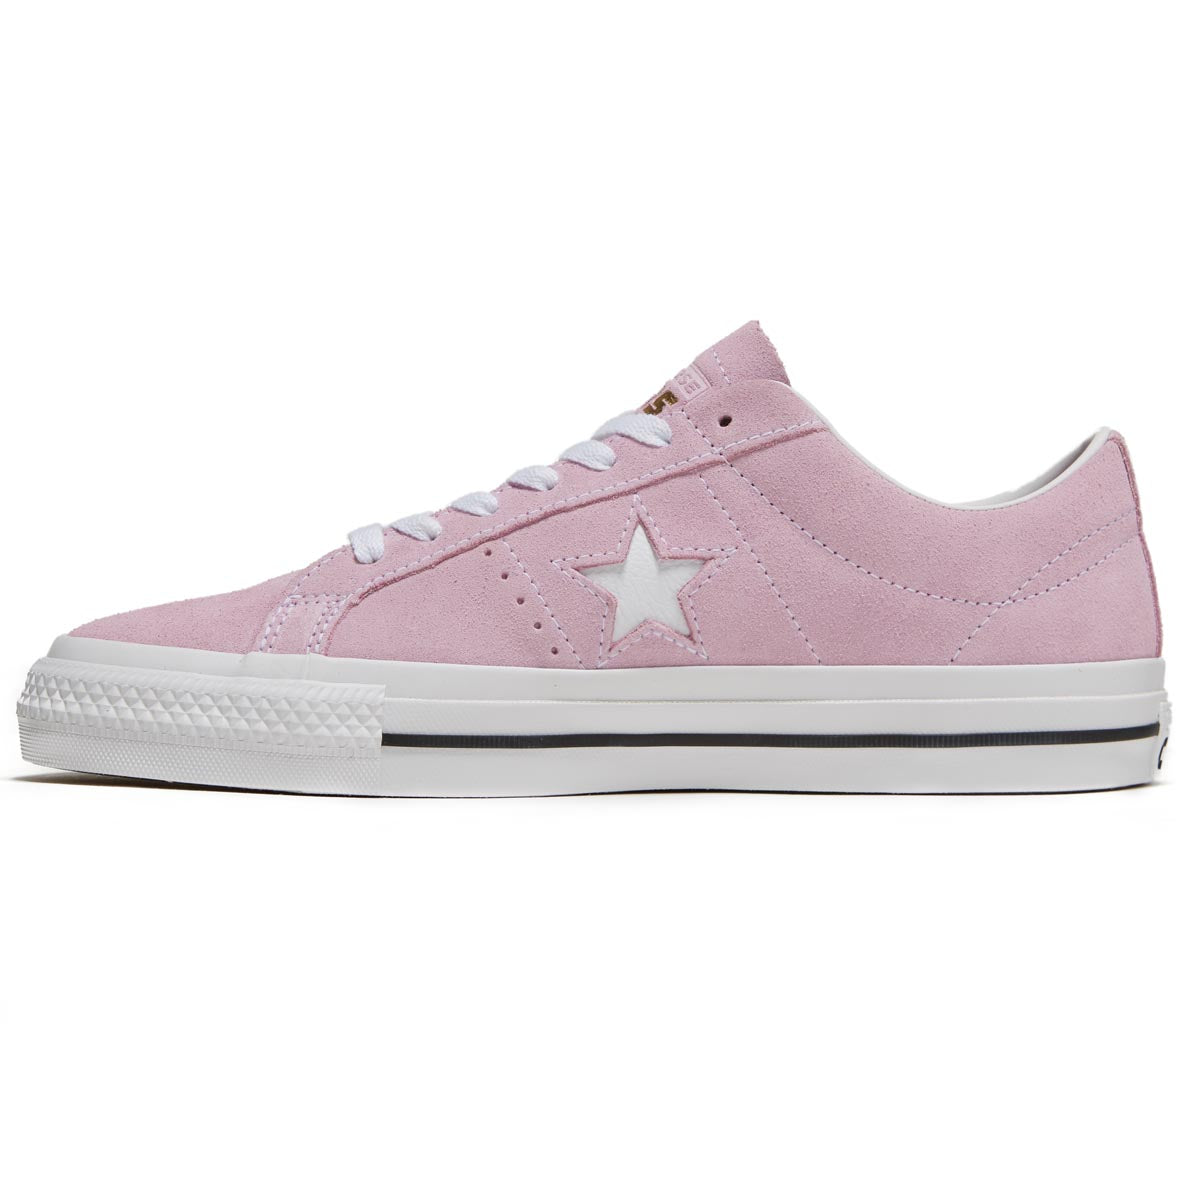 Converse One Star Pro Shoes - Stardust Lilac/White/Black image 2